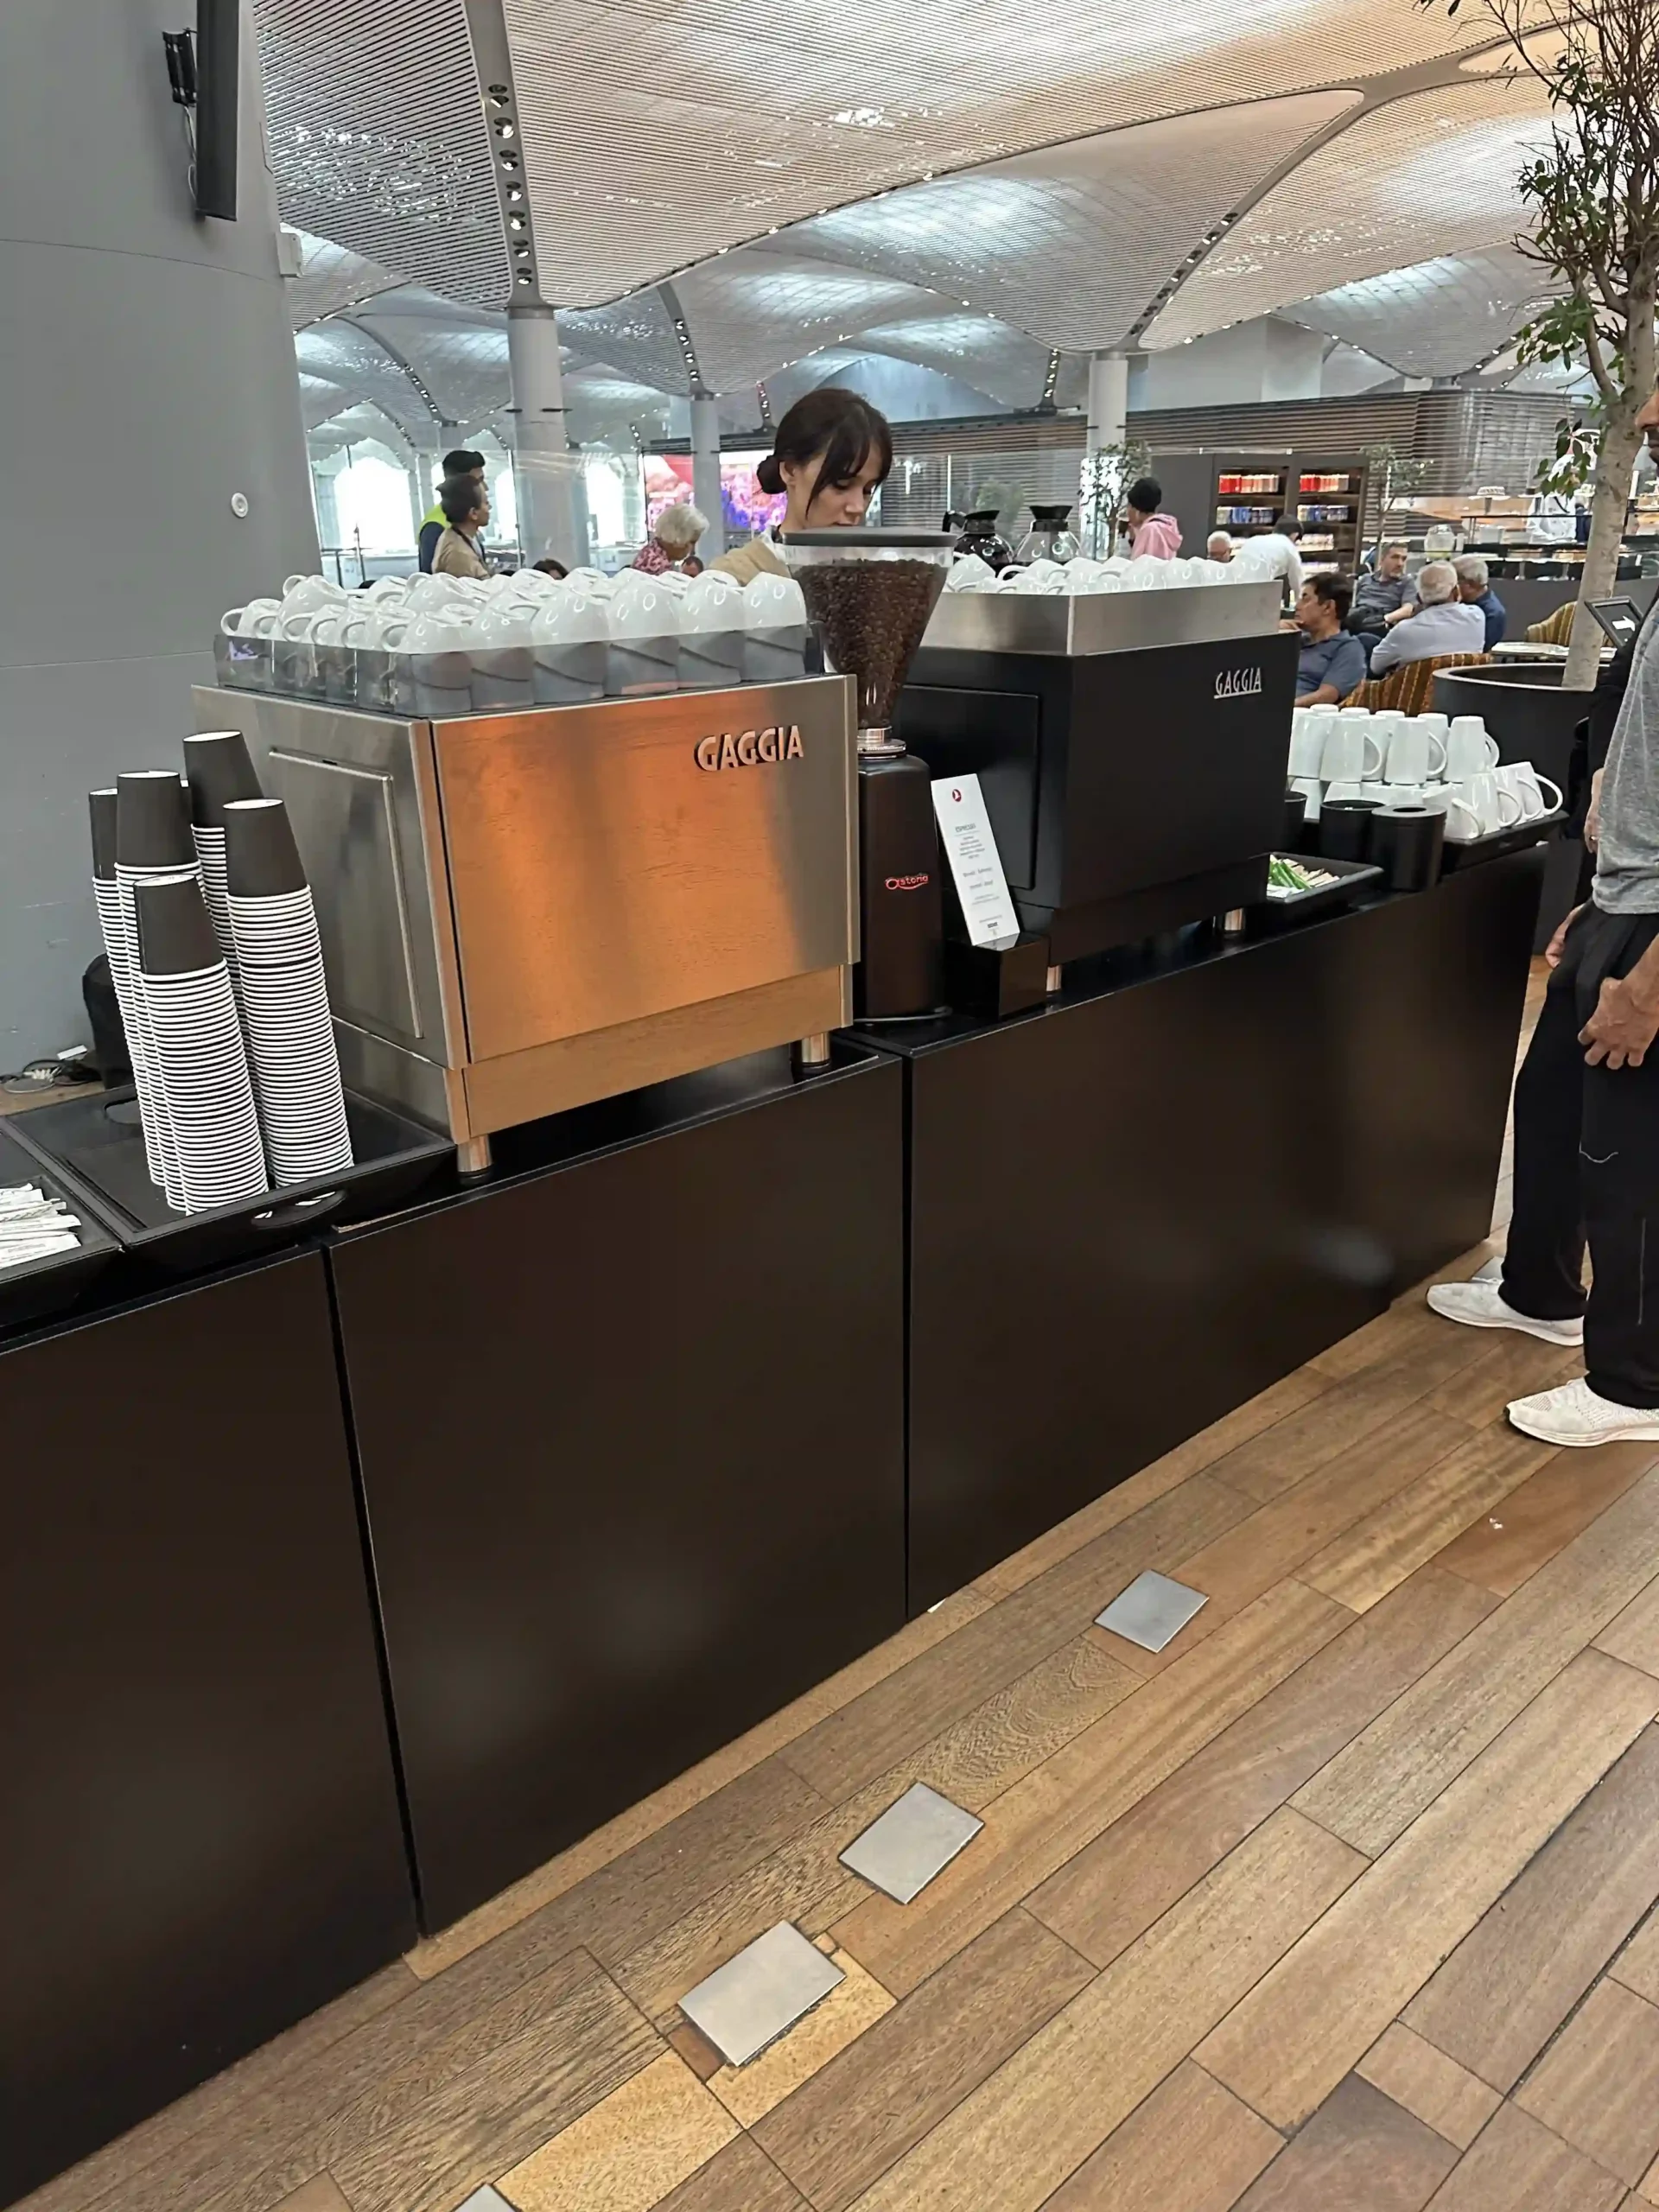 a woman standing at a coffee machine